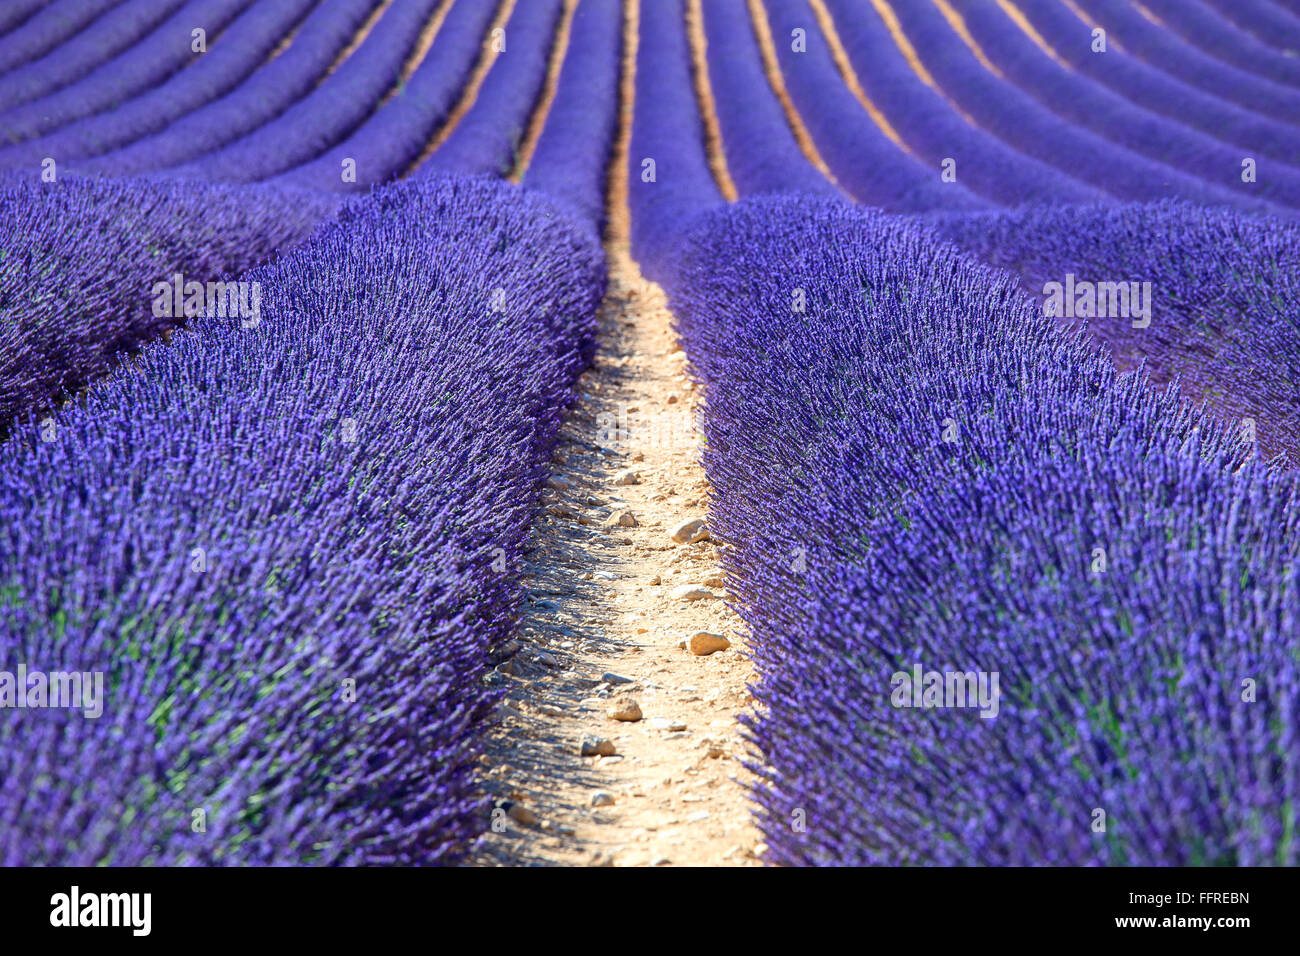 Lavender flower blooming fields in endless rows as a pattern or texture. Landscape in Valensole plateau, Provence, France, Europ Stock Photo